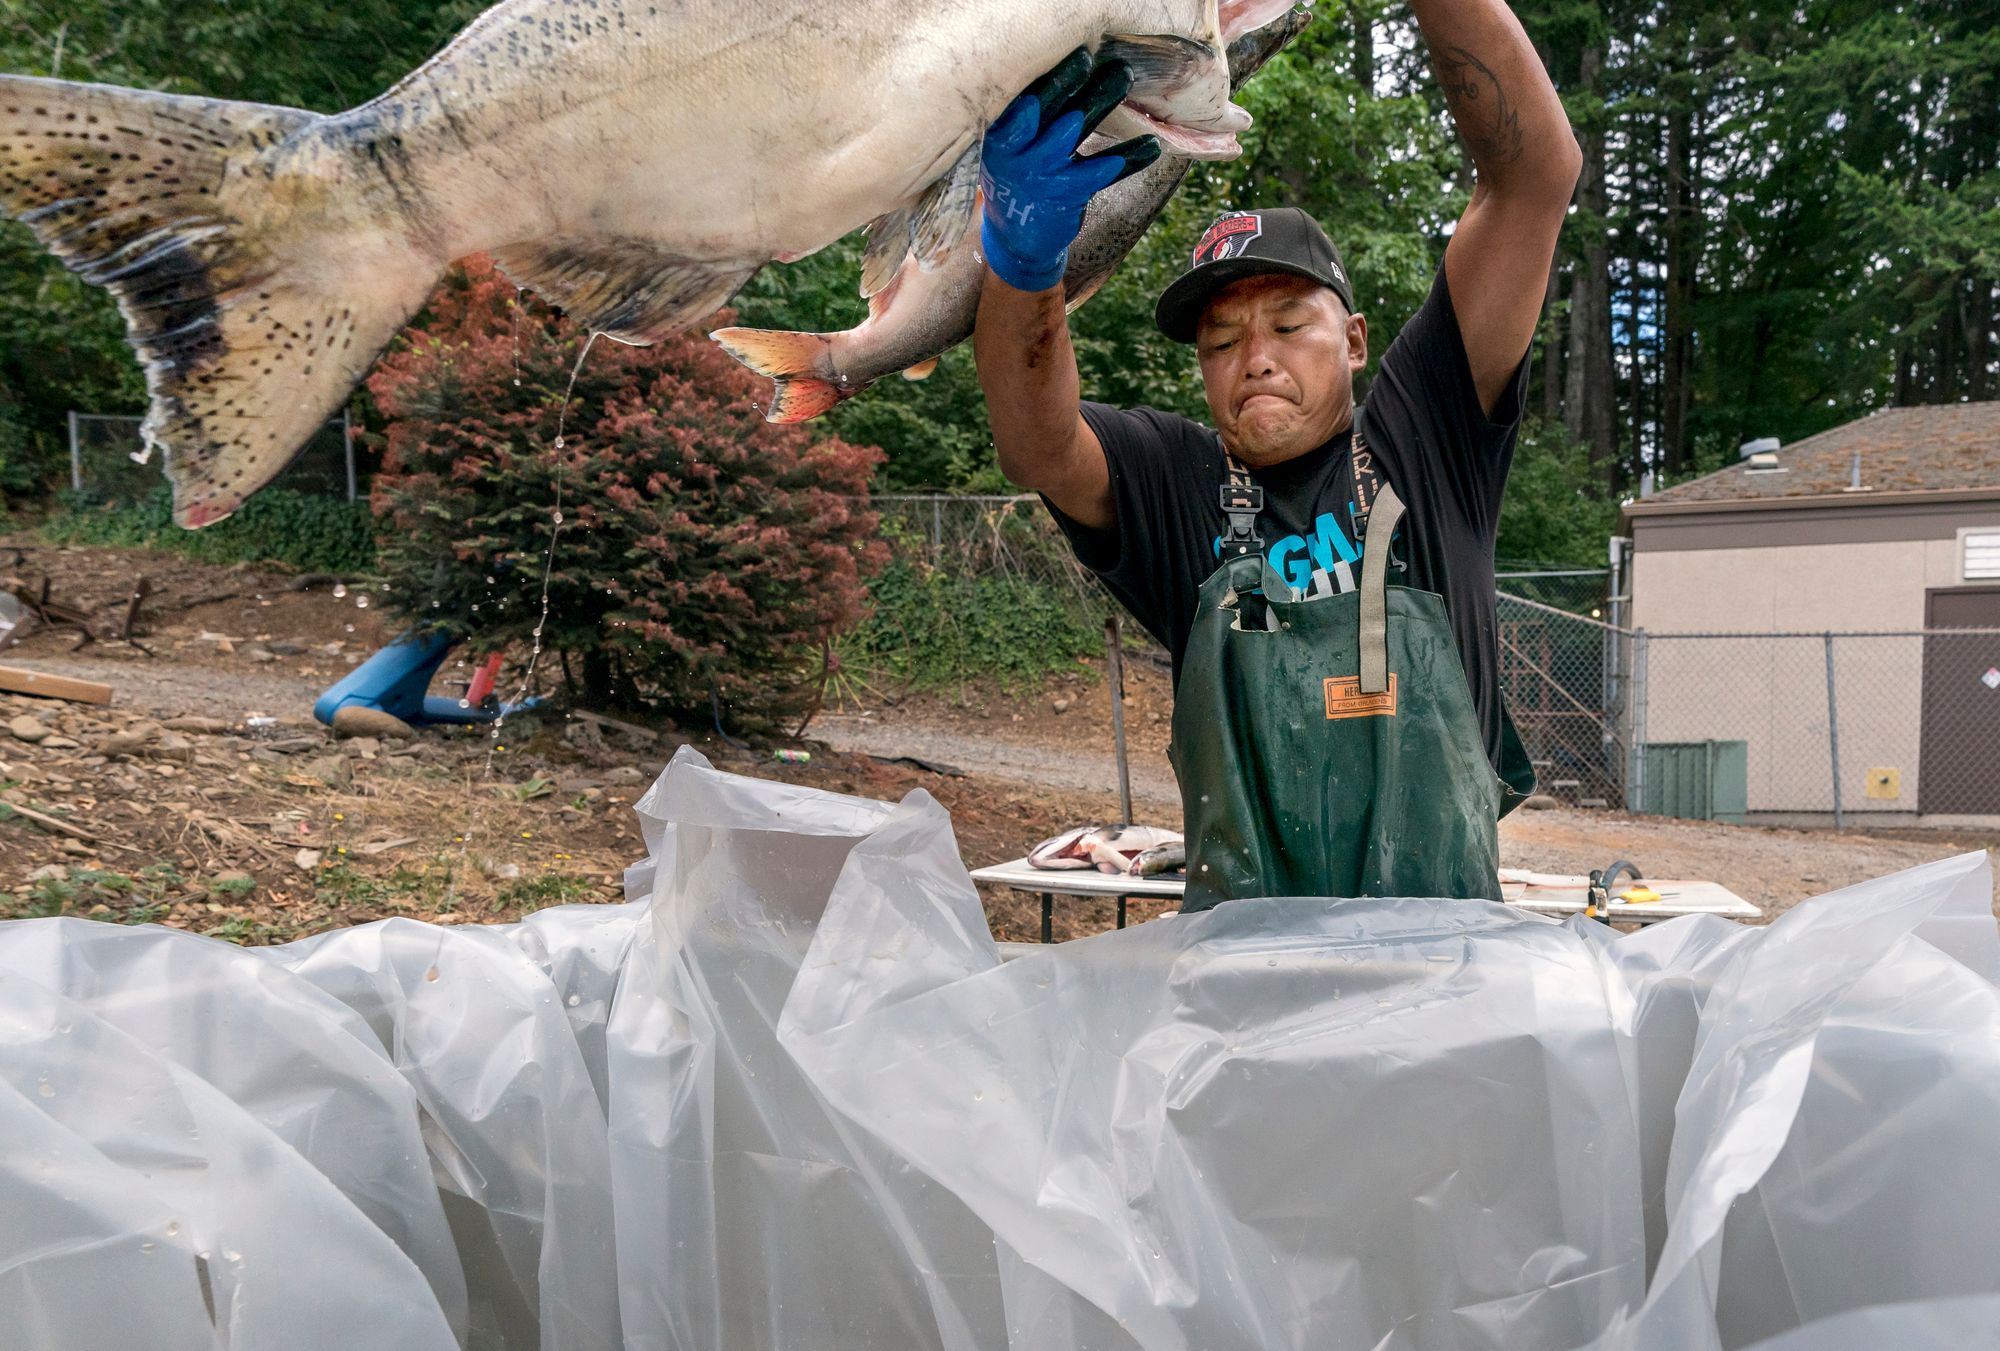 an indigenous man wearing a waterproof apron and a baseball cap throws a large salmon into a large plastic sheet lined container